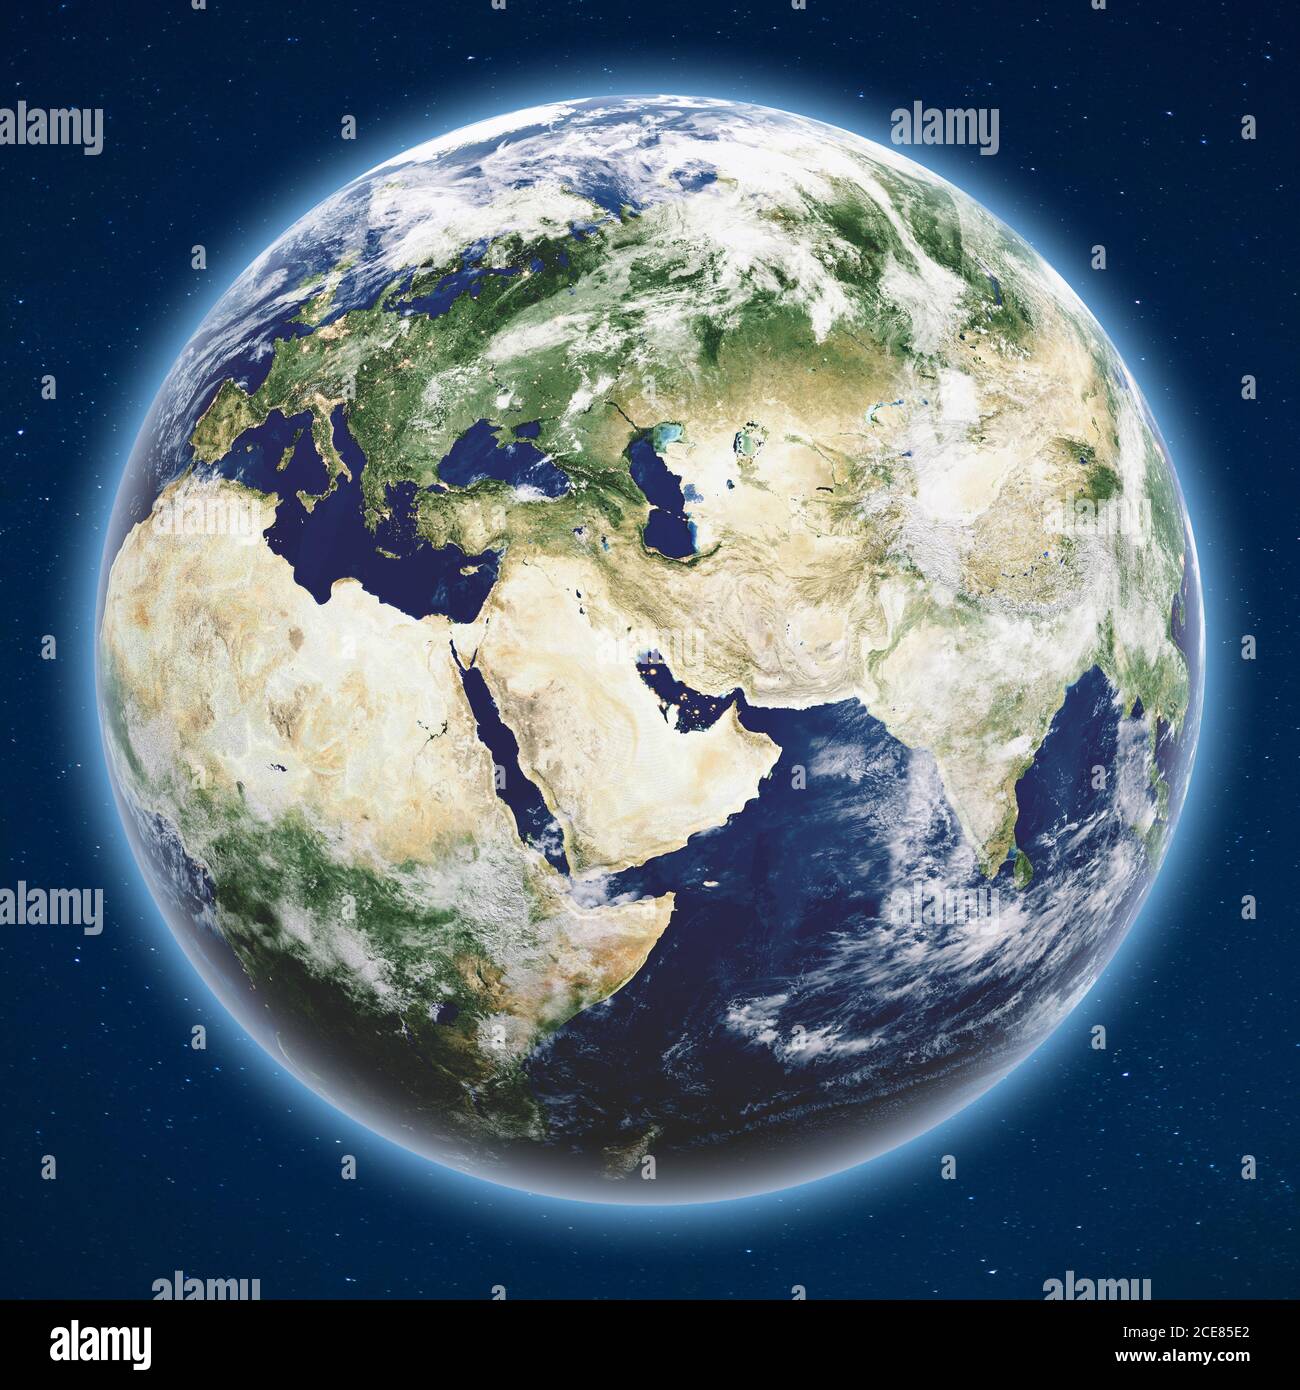 Planet Earth from space Stock Photo